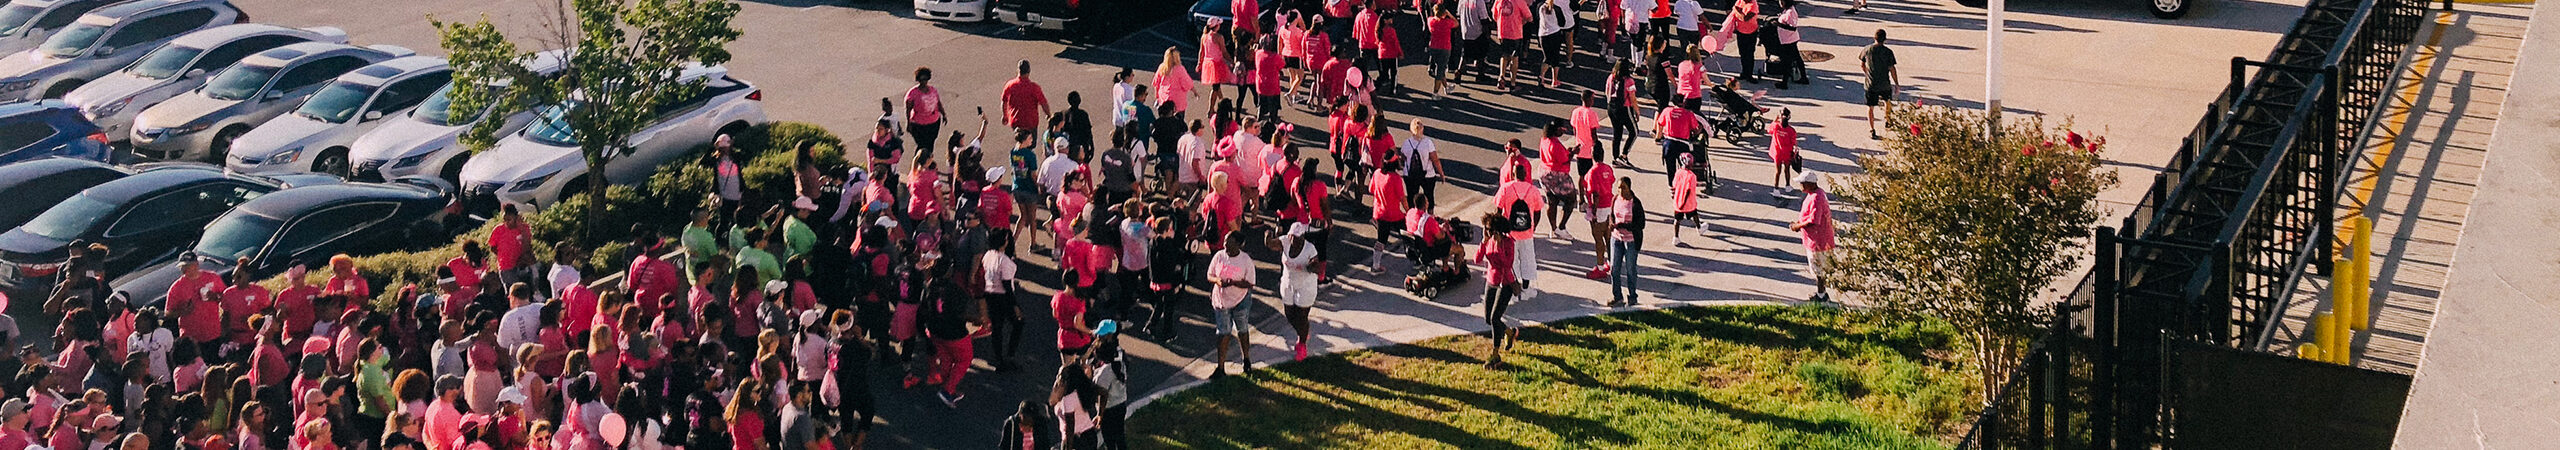 Making Strides of Jacksonville – American Cancer Society